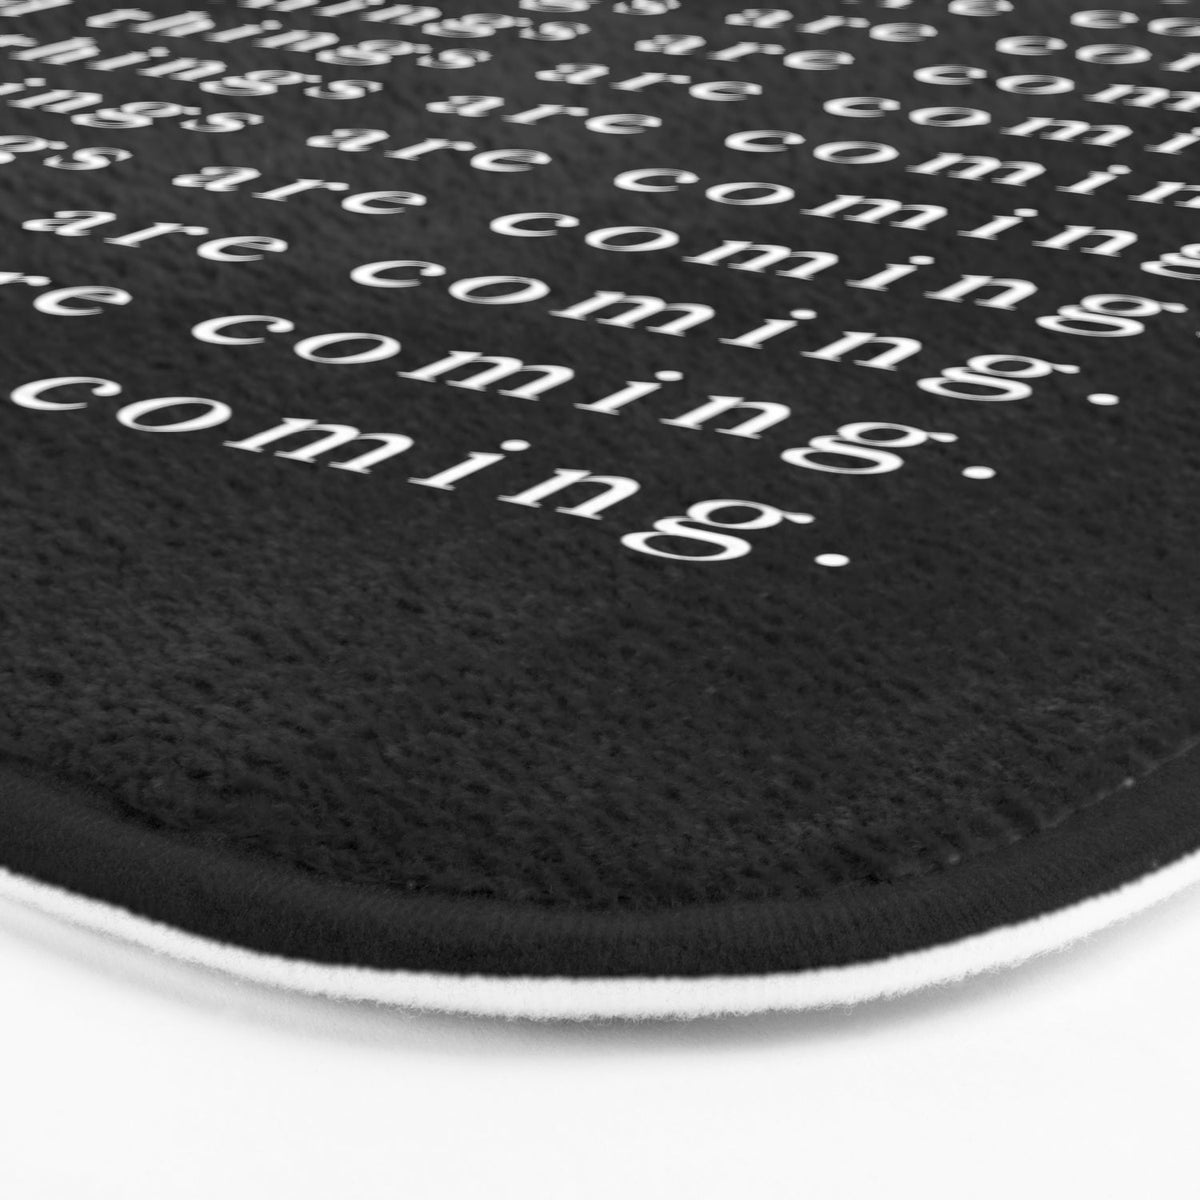 Good Things Are Coming Bathmat